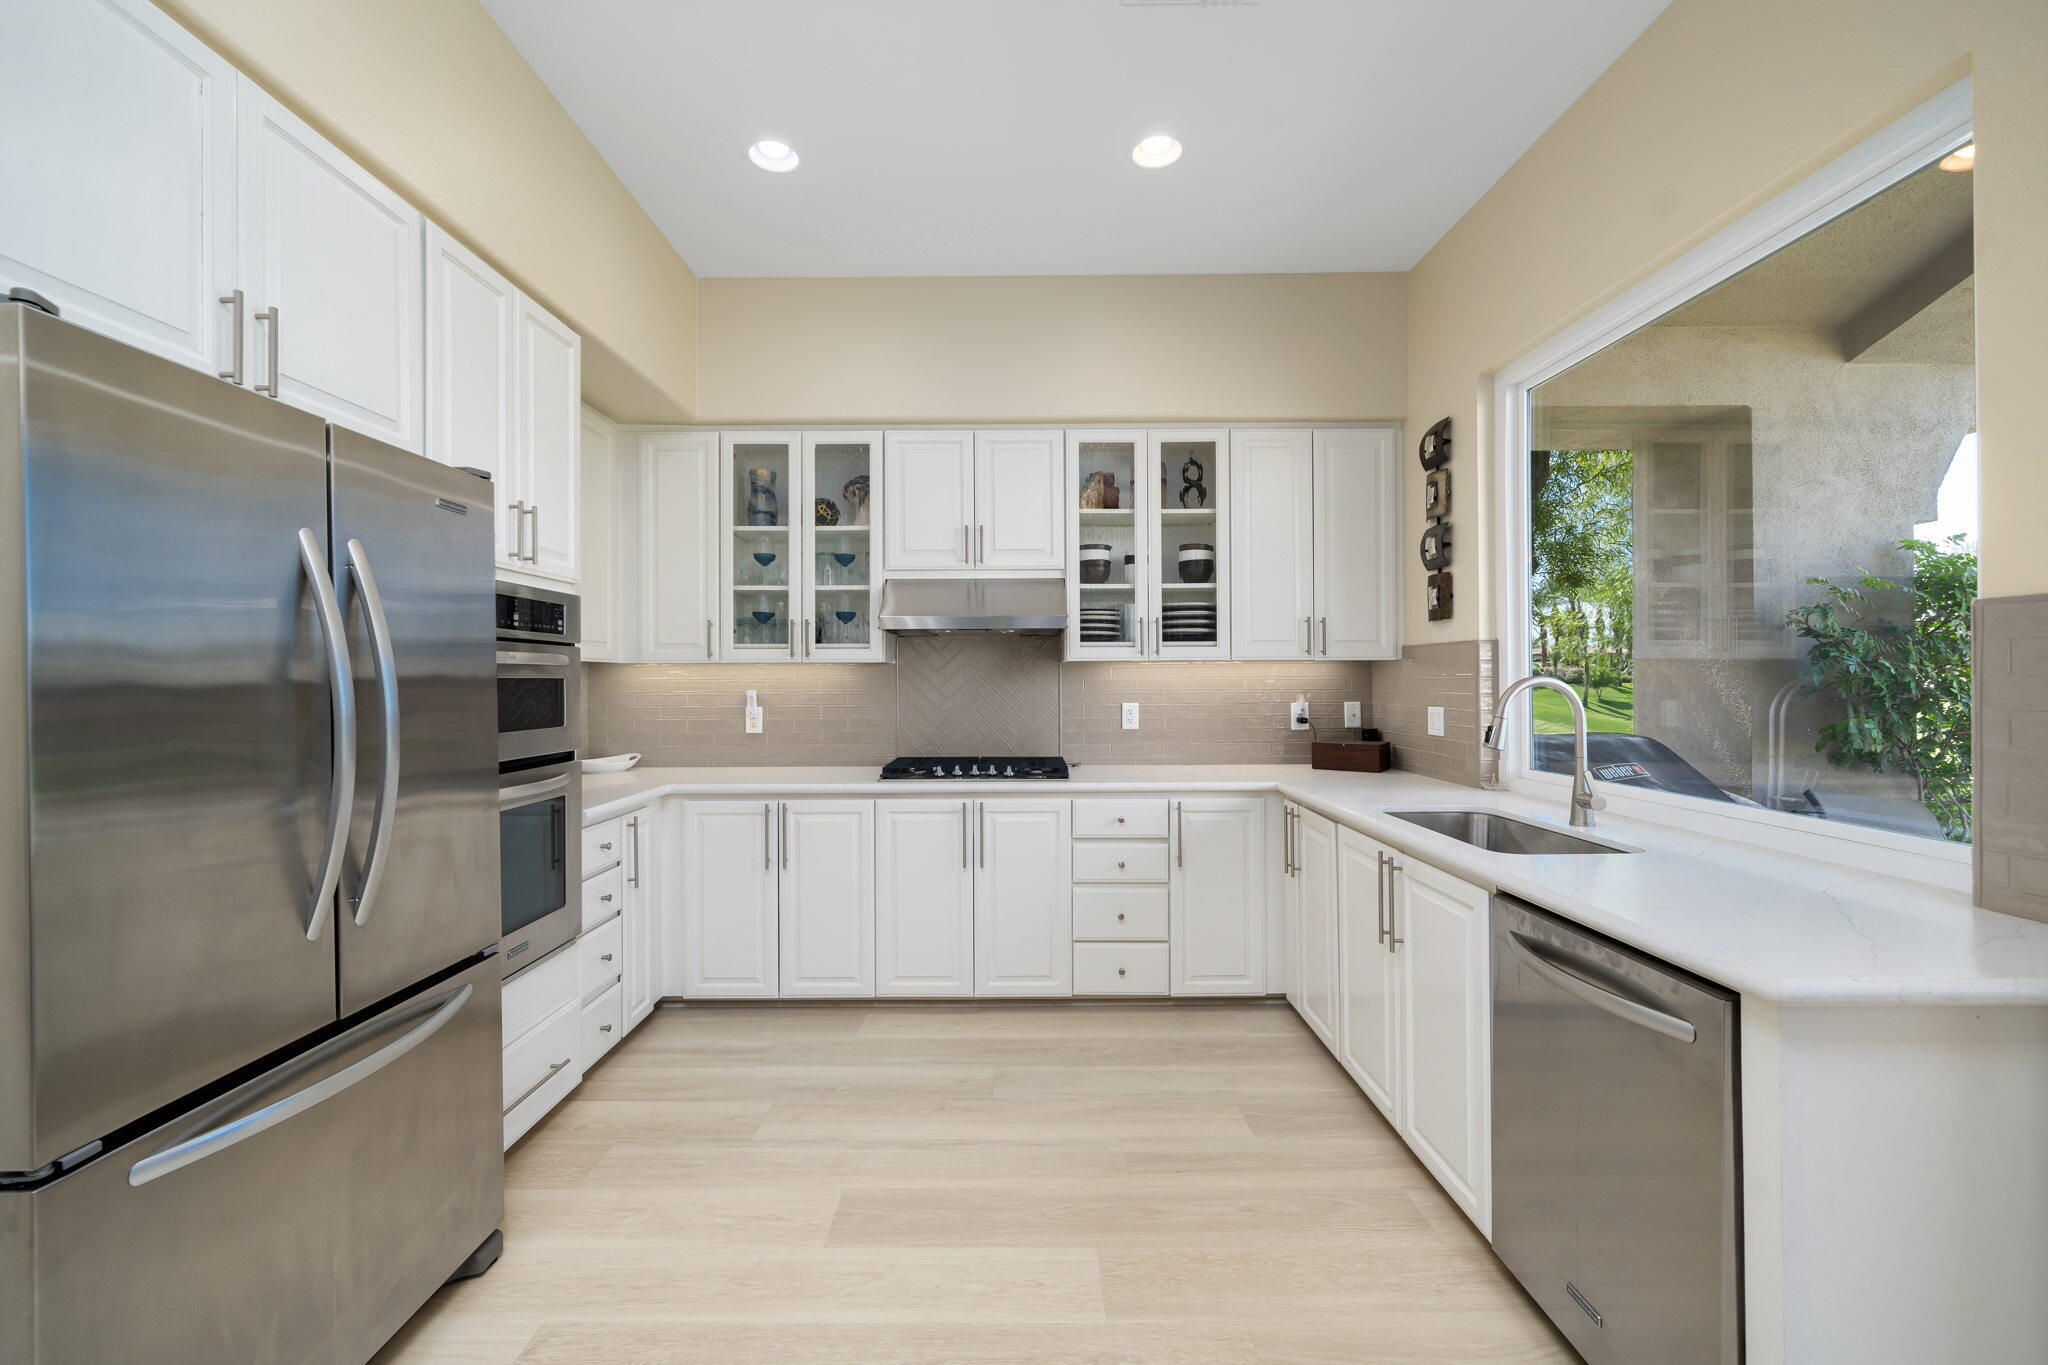 a kitchen with stainless steel appliances granite countertop a refrigerator sink and cabinets